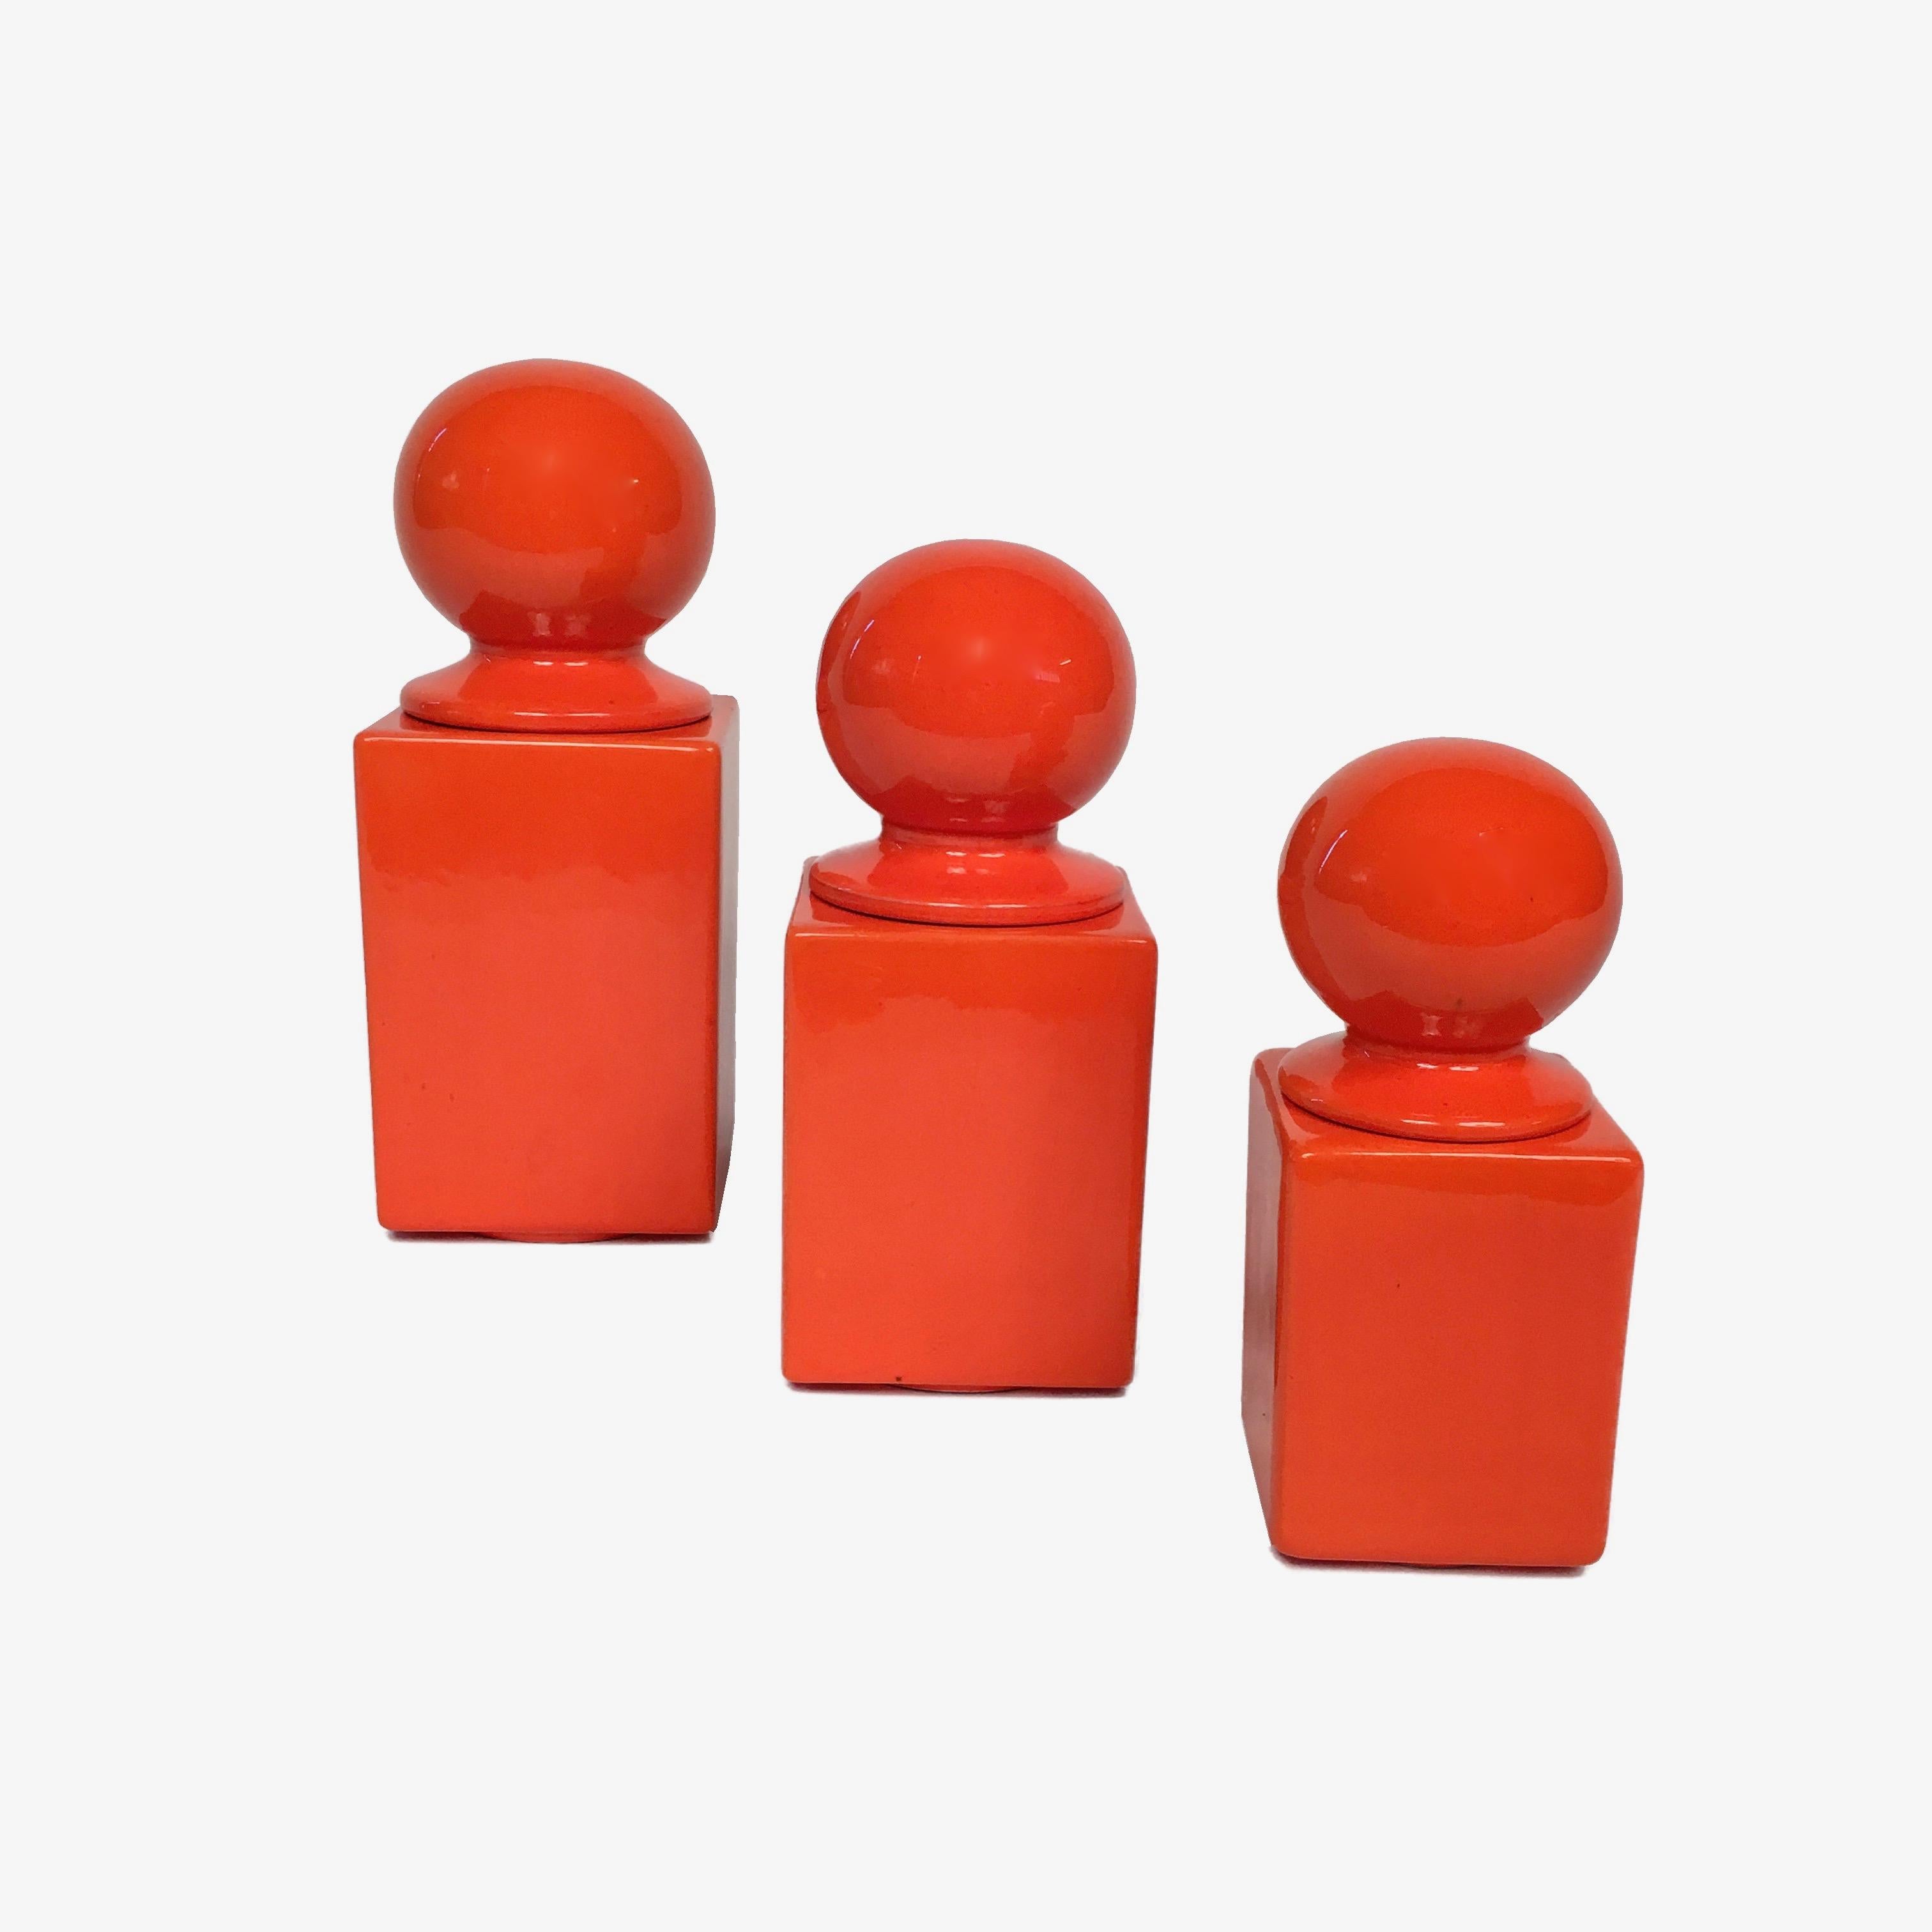 Set of three orange glazed ceramic boxes by Pino Spagnolo for Sicart, Italy. 
Each box has different dimensions, following an ascending order:
25 x 10 x 10 cm;
21 x 9 x 9 cm;
18 x 7.5 x 7.5 cm.
Conditions: excellent, except for the middle-sized